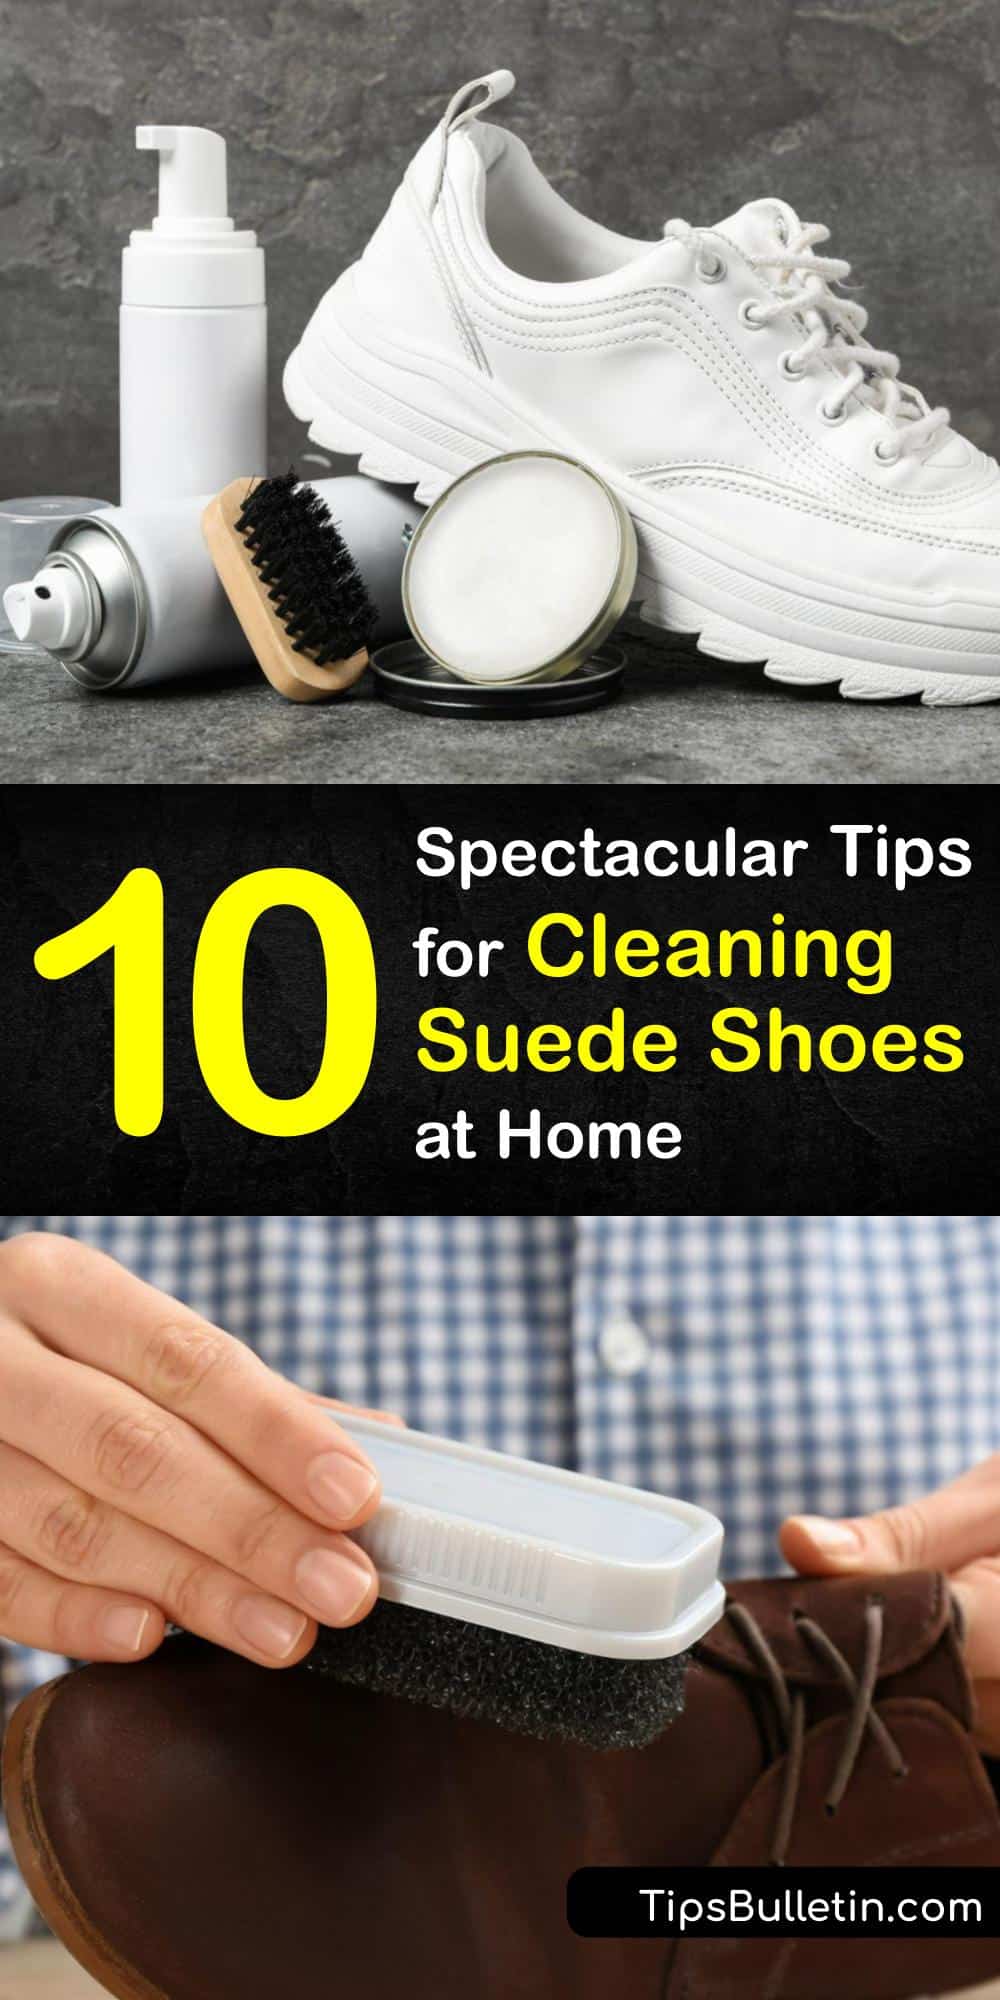 GoogleDrive How To Clean Suede Shoes P1a 